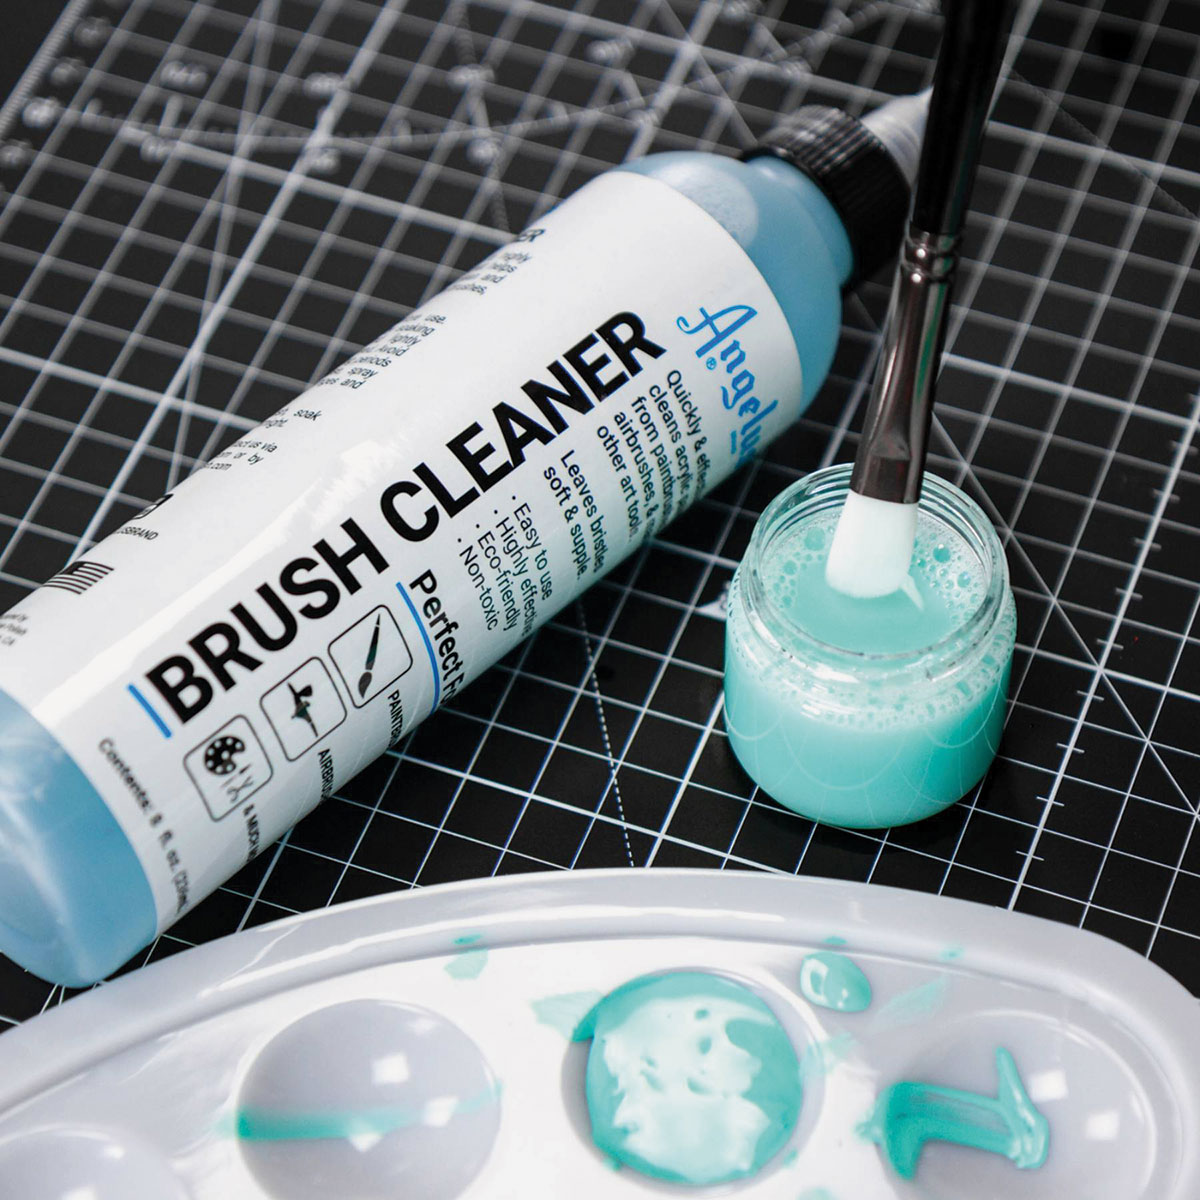 Paint Brush Cleaners and Washers